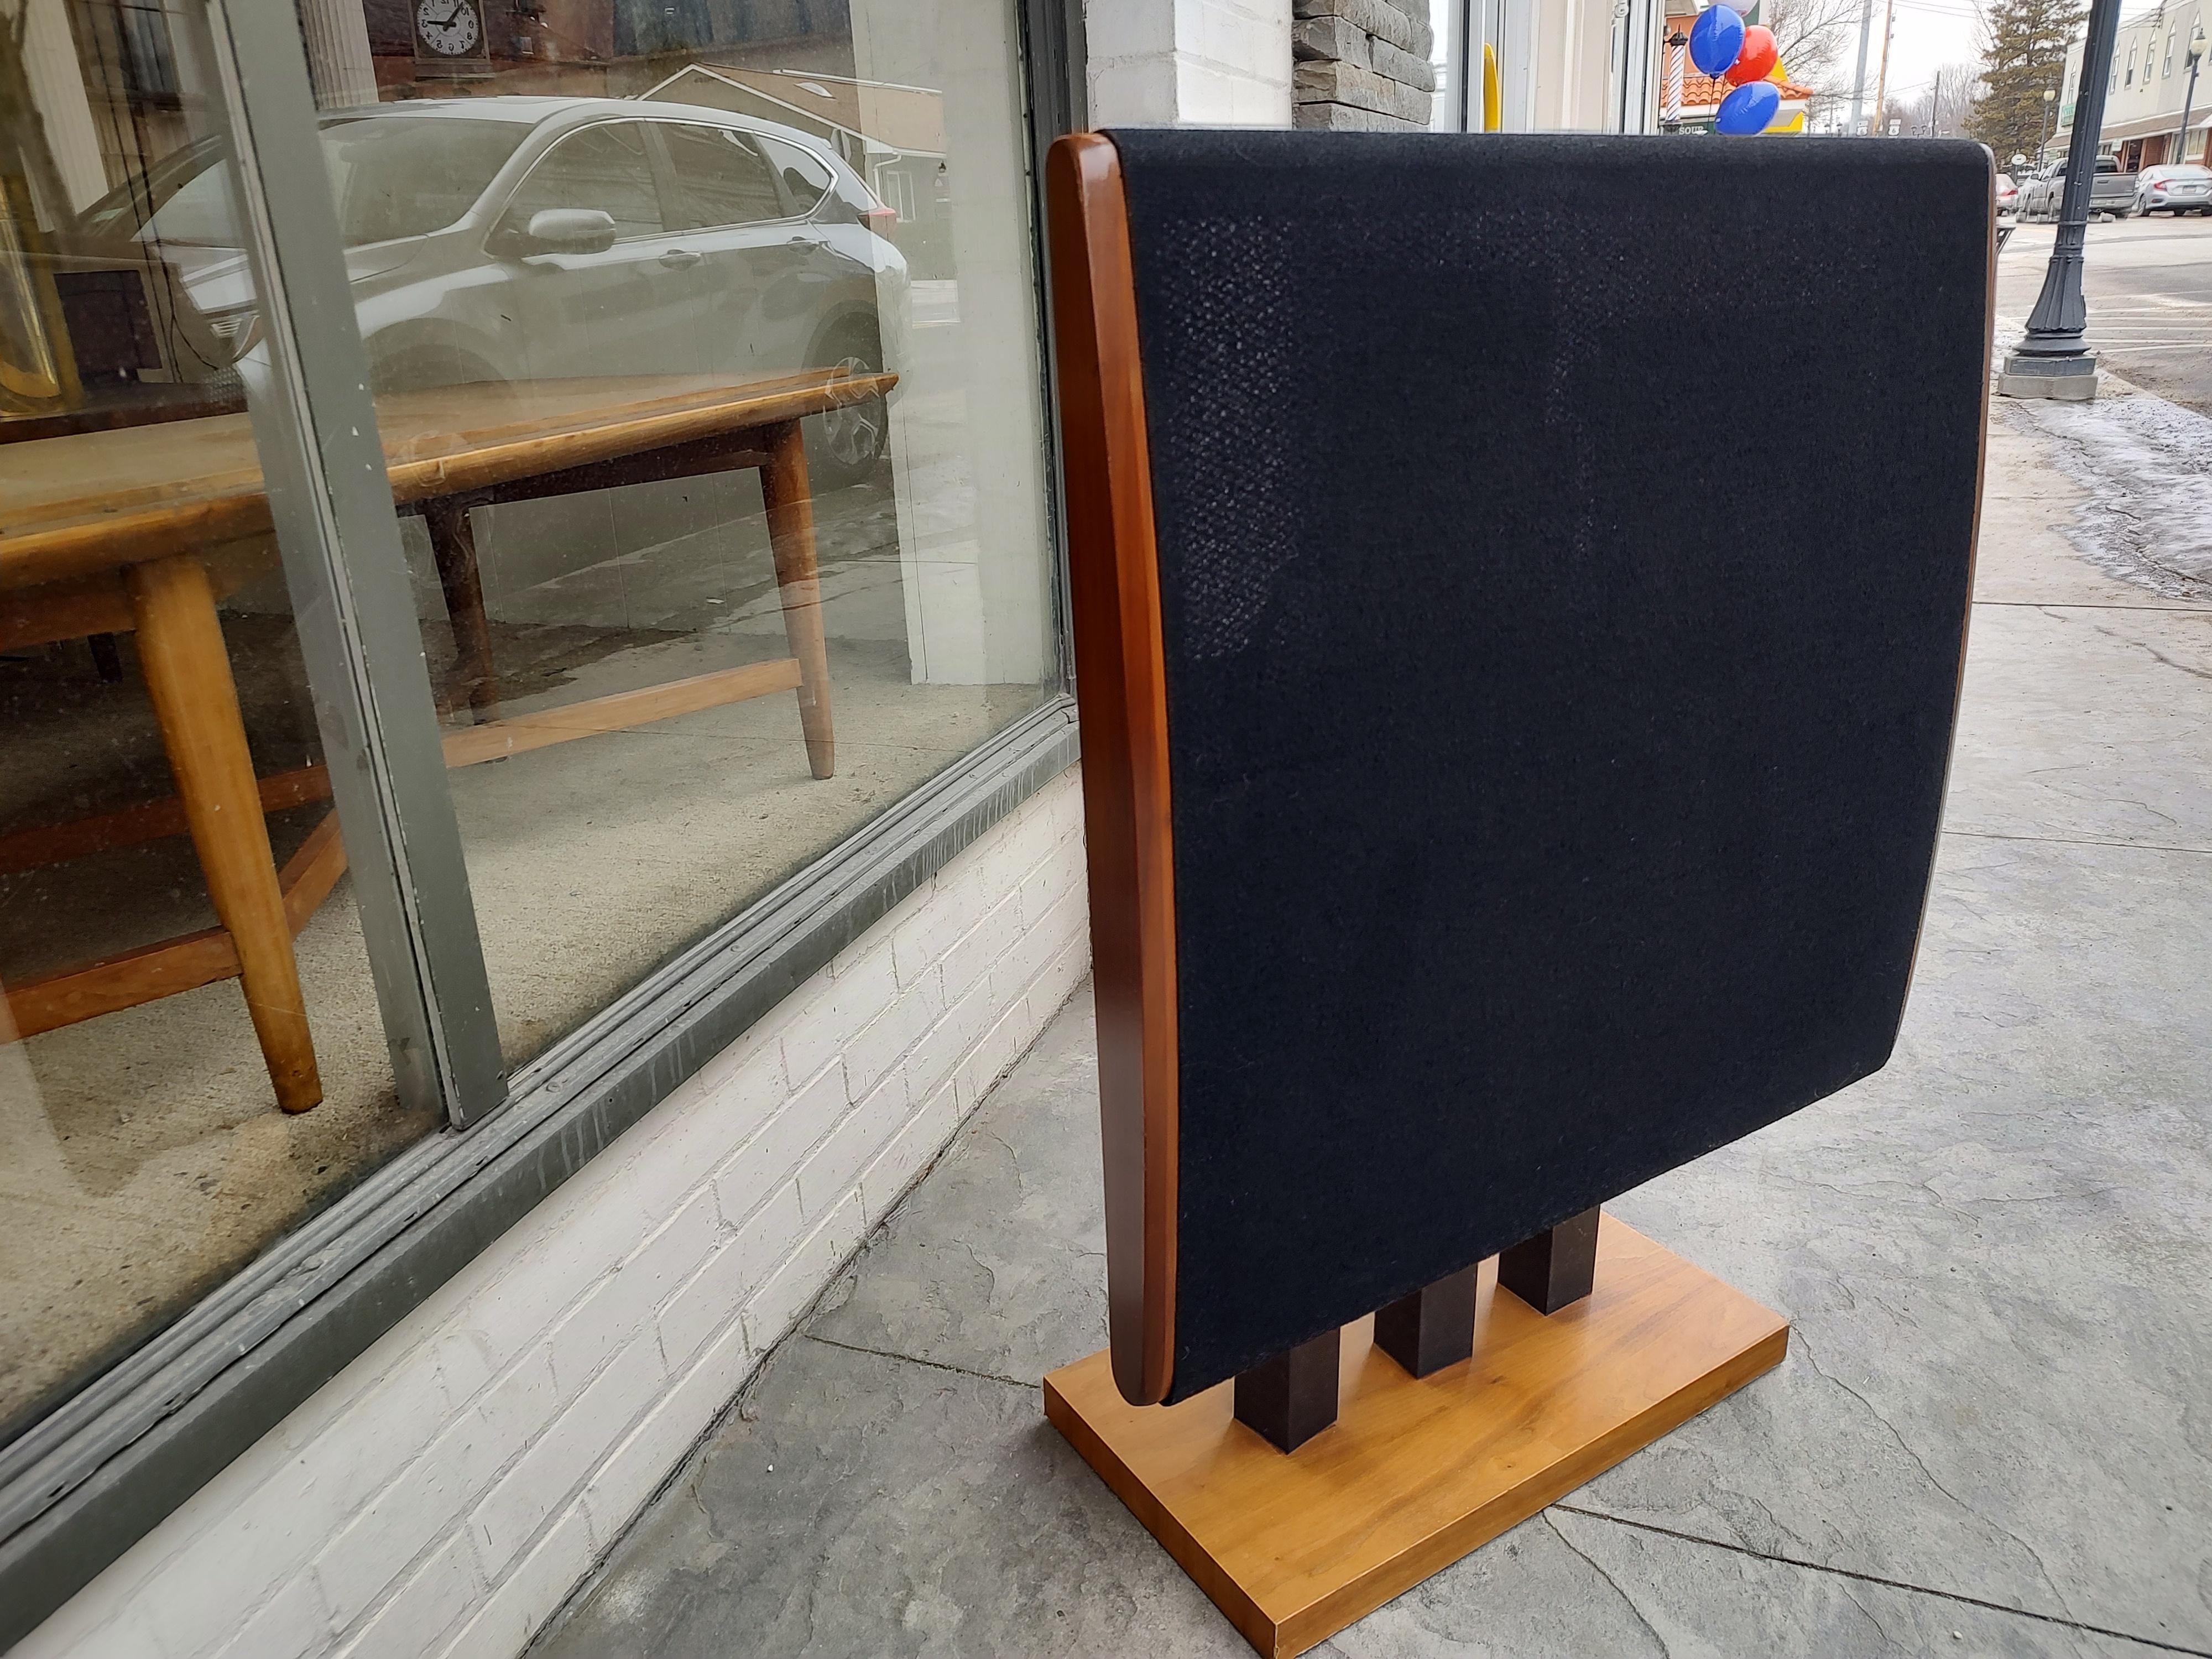 Late 20th Century Mid-Century Modern Pair of Dahlquist Dq-10 Speakers on Stands